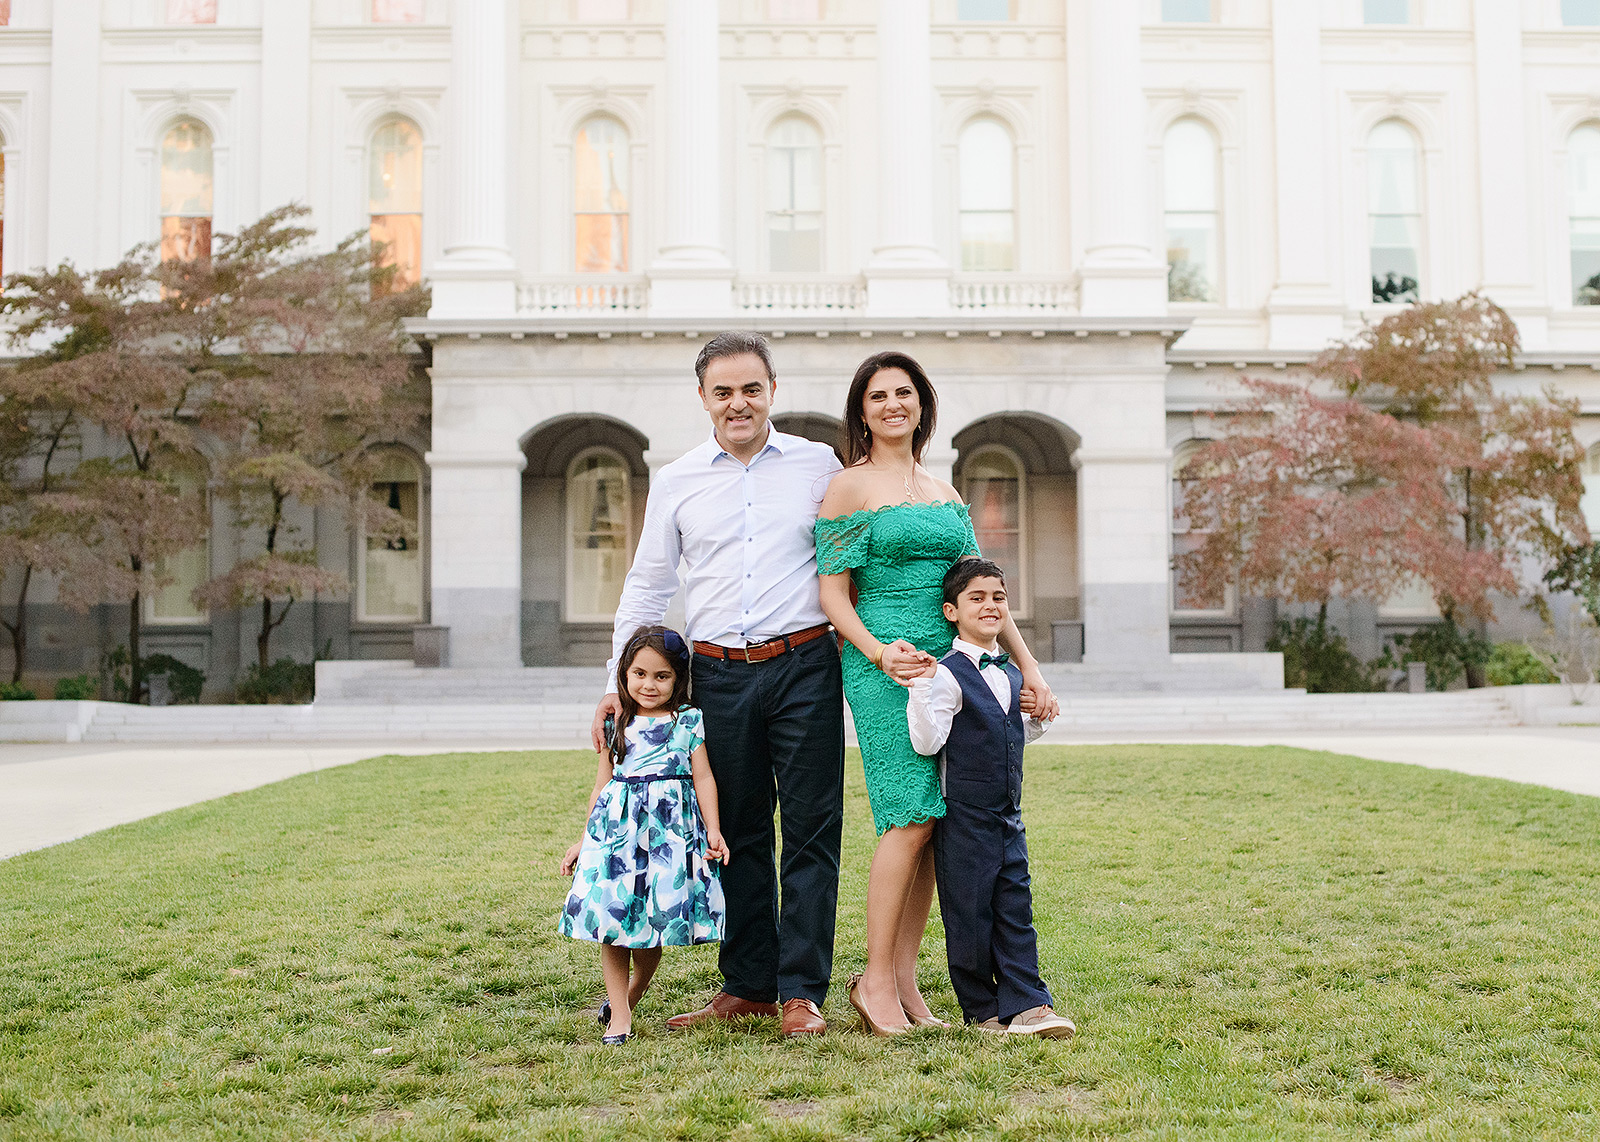 Family photo in front of the lawn at State Capitol